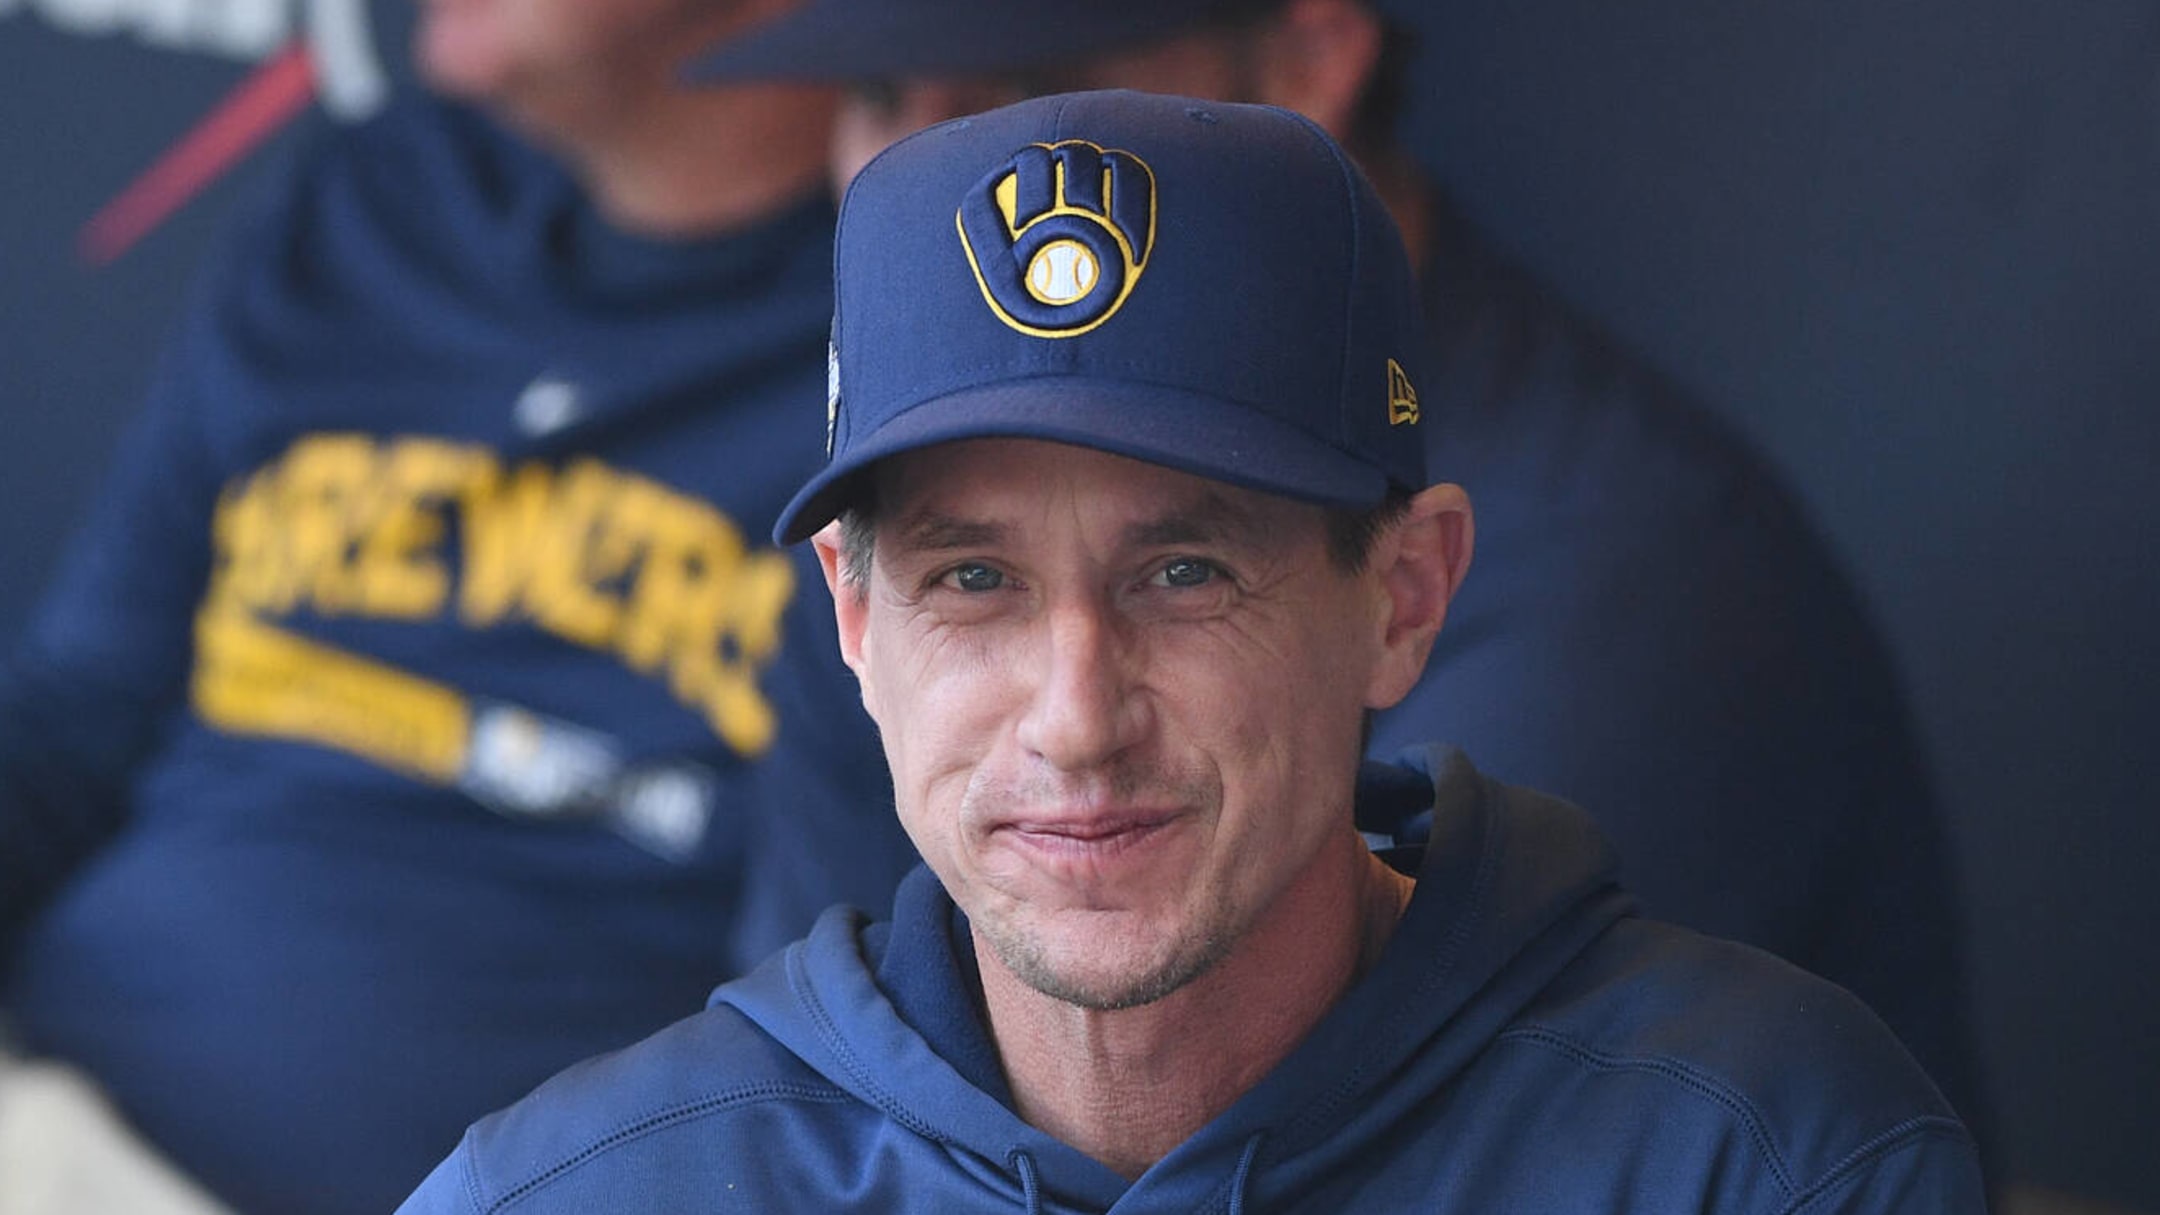 Mets reportedly have 'reasonable chance' of bringing in Counsell